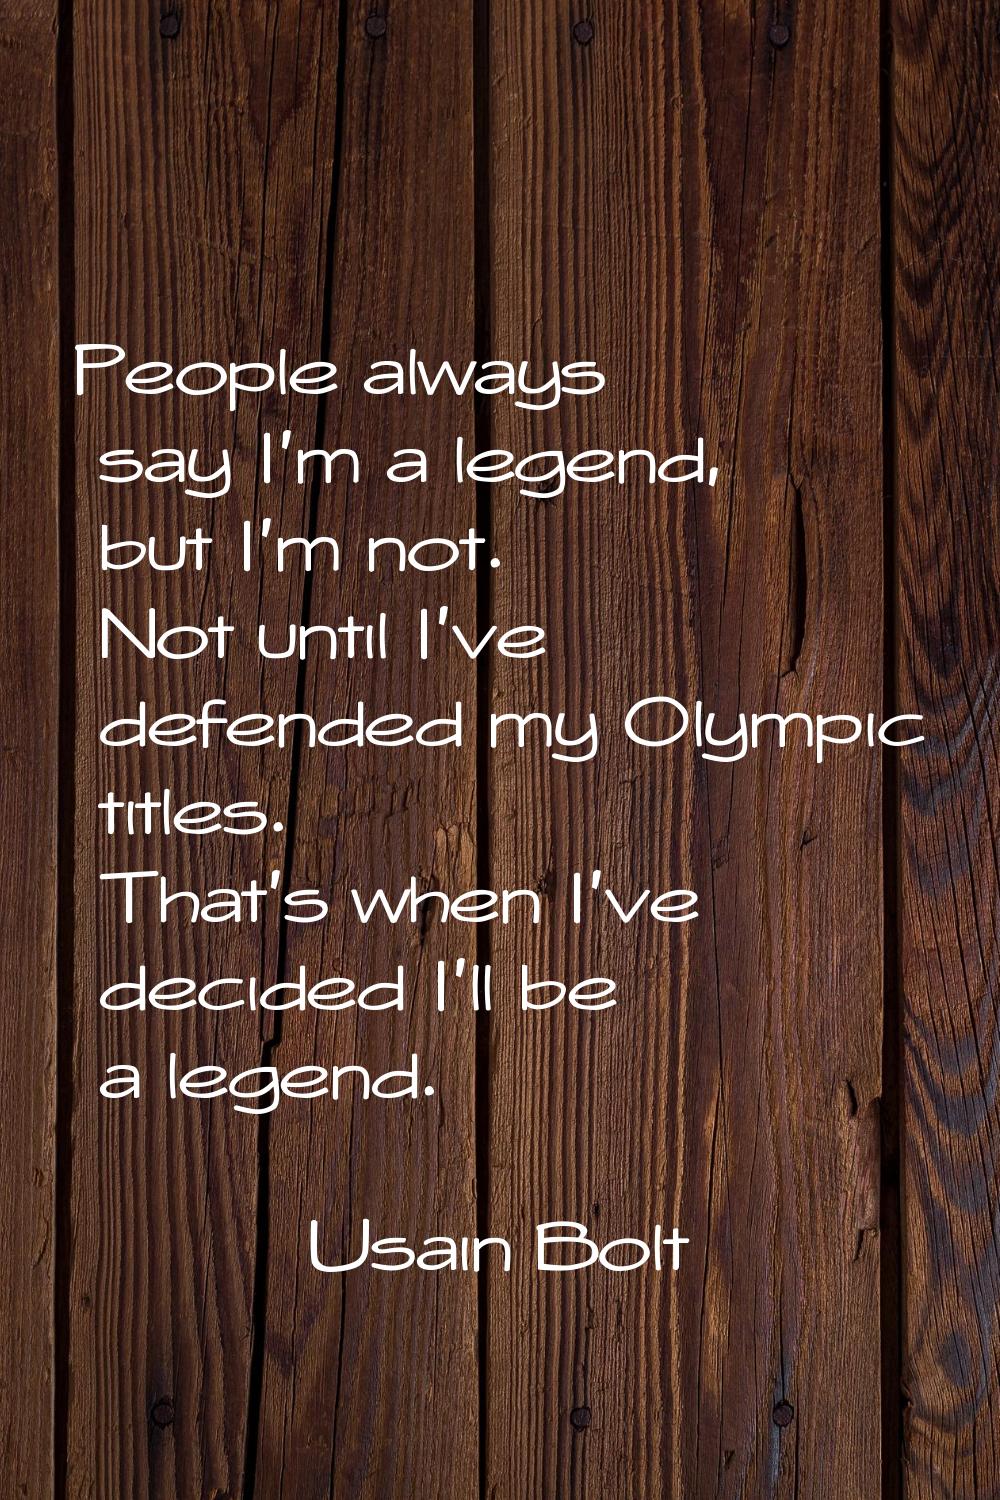 People always say I'm a legend, but I'm not. Not until I've defended my Olympic titles. That's when